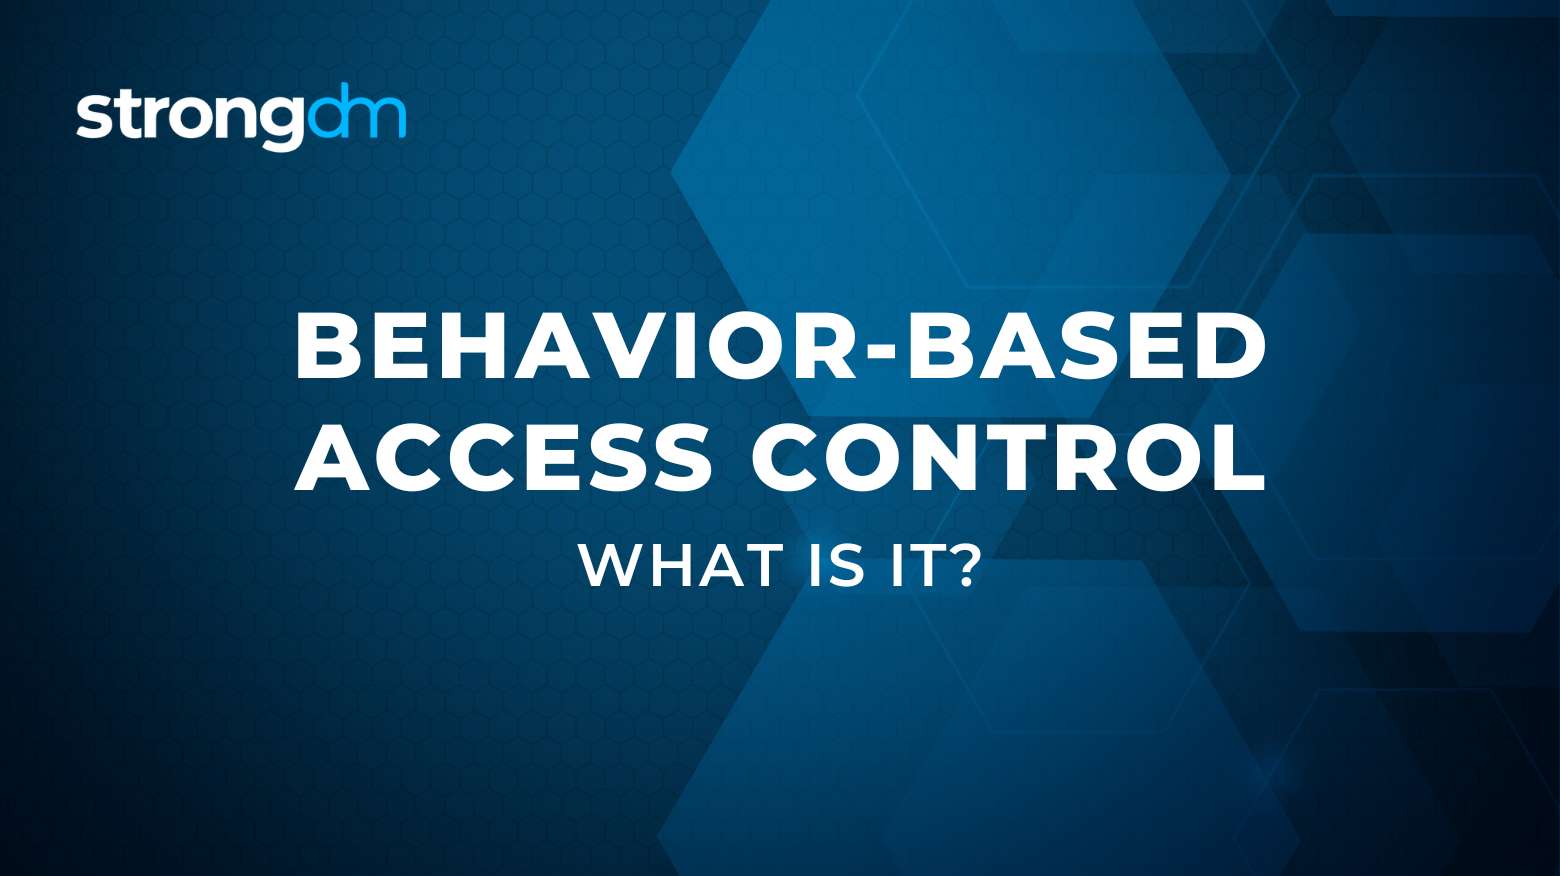 What is Behavior-Based Access Control (BBAC)?